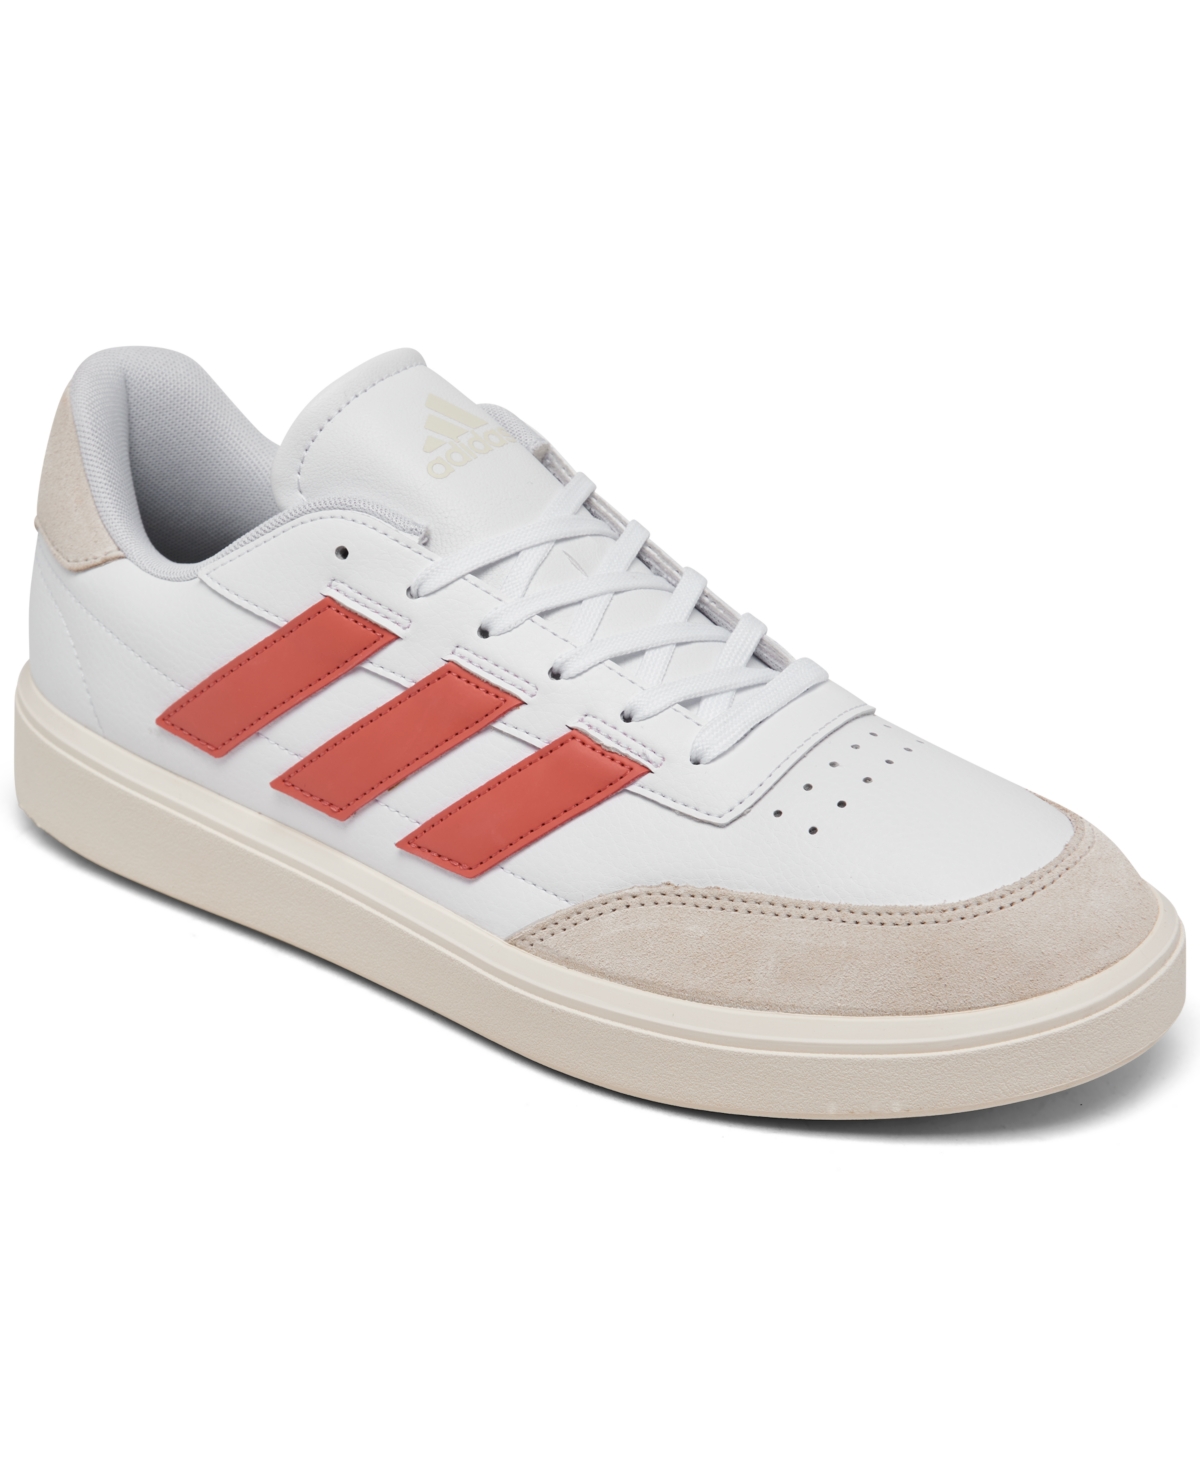 Adidas Originals Men's Courtblock Lifestyle Casual Sneakers From Finish Line In White,preloved Scarlet